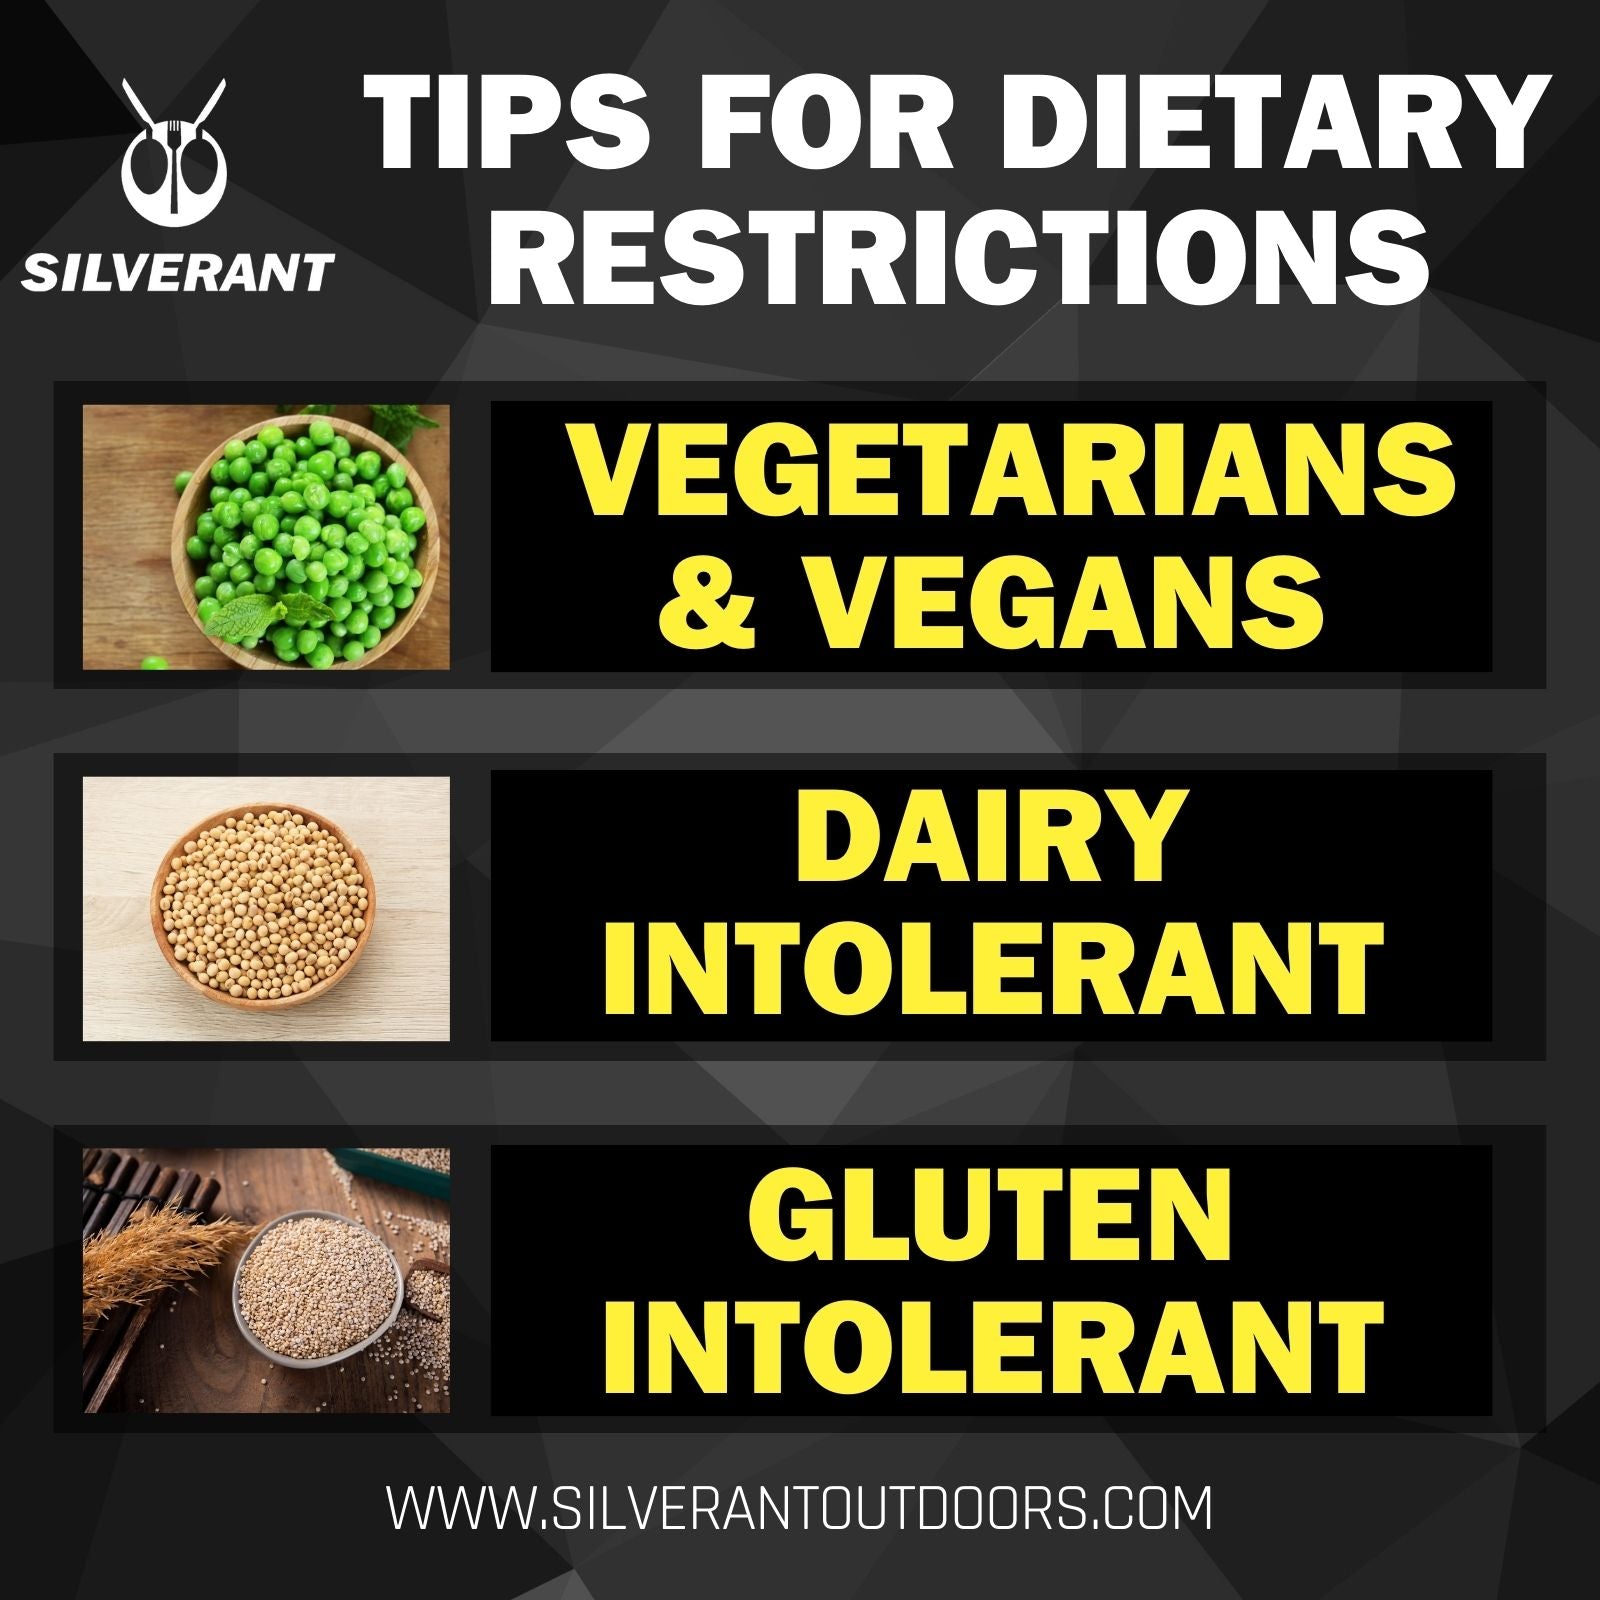 Special Considerations for Dietary Restrictions